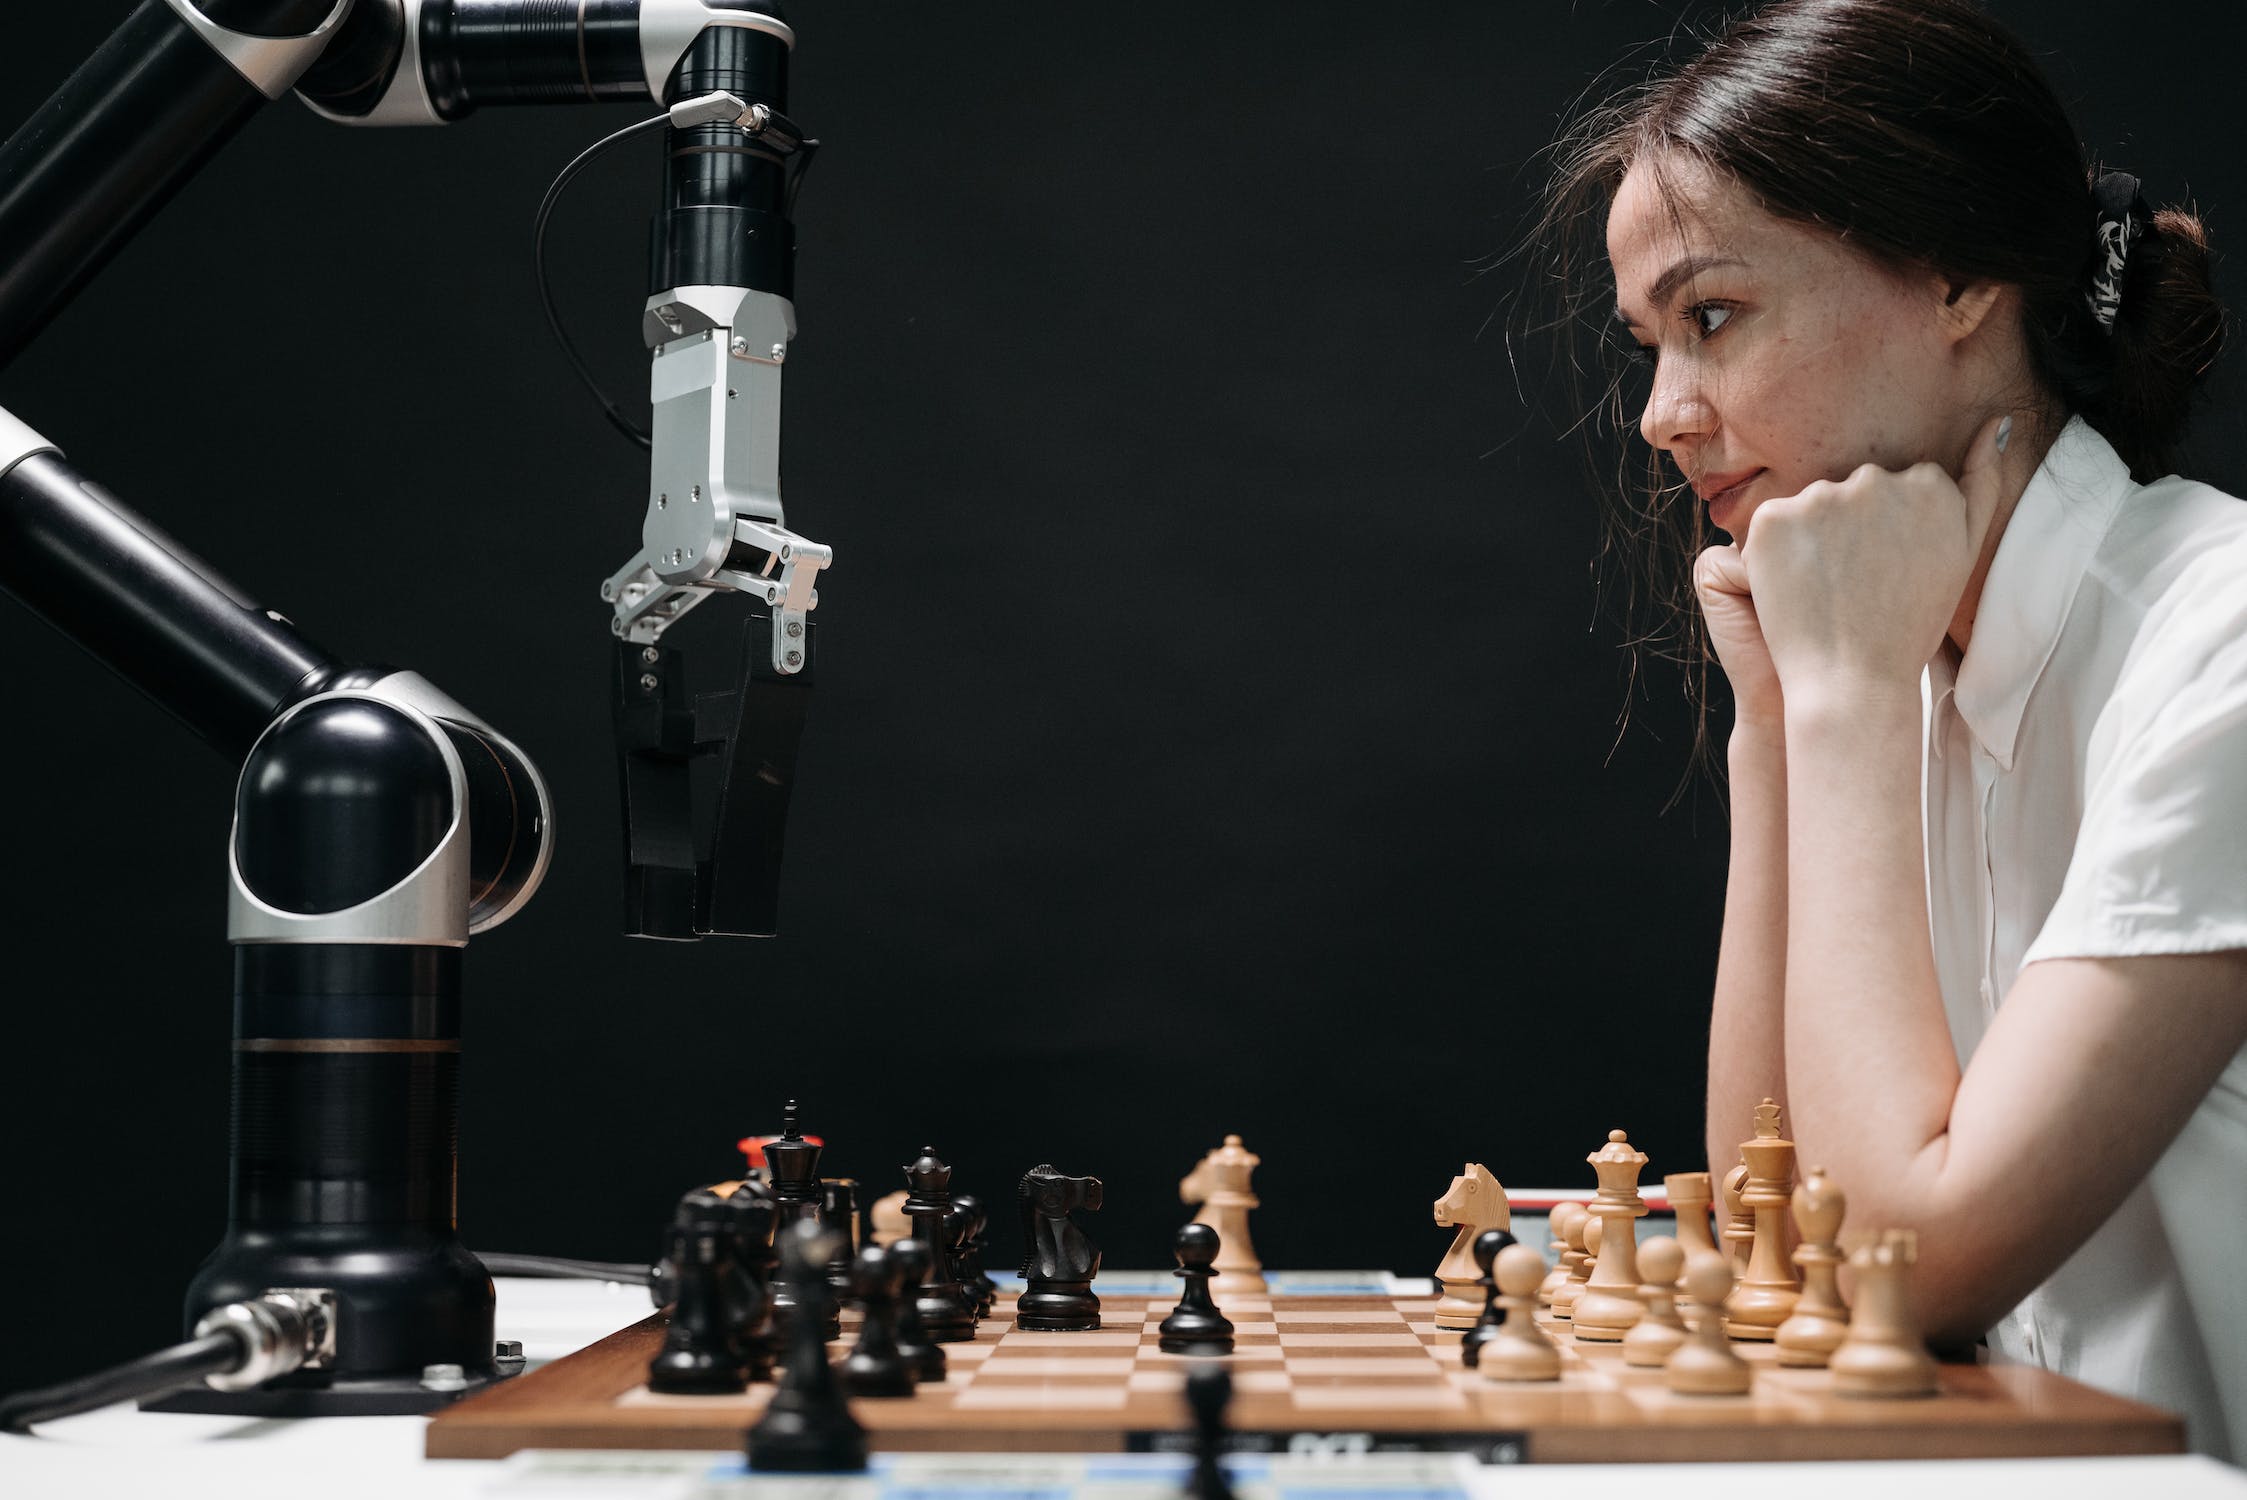 AlphaZero: The AI from Google which mastered Chess in 4 hours